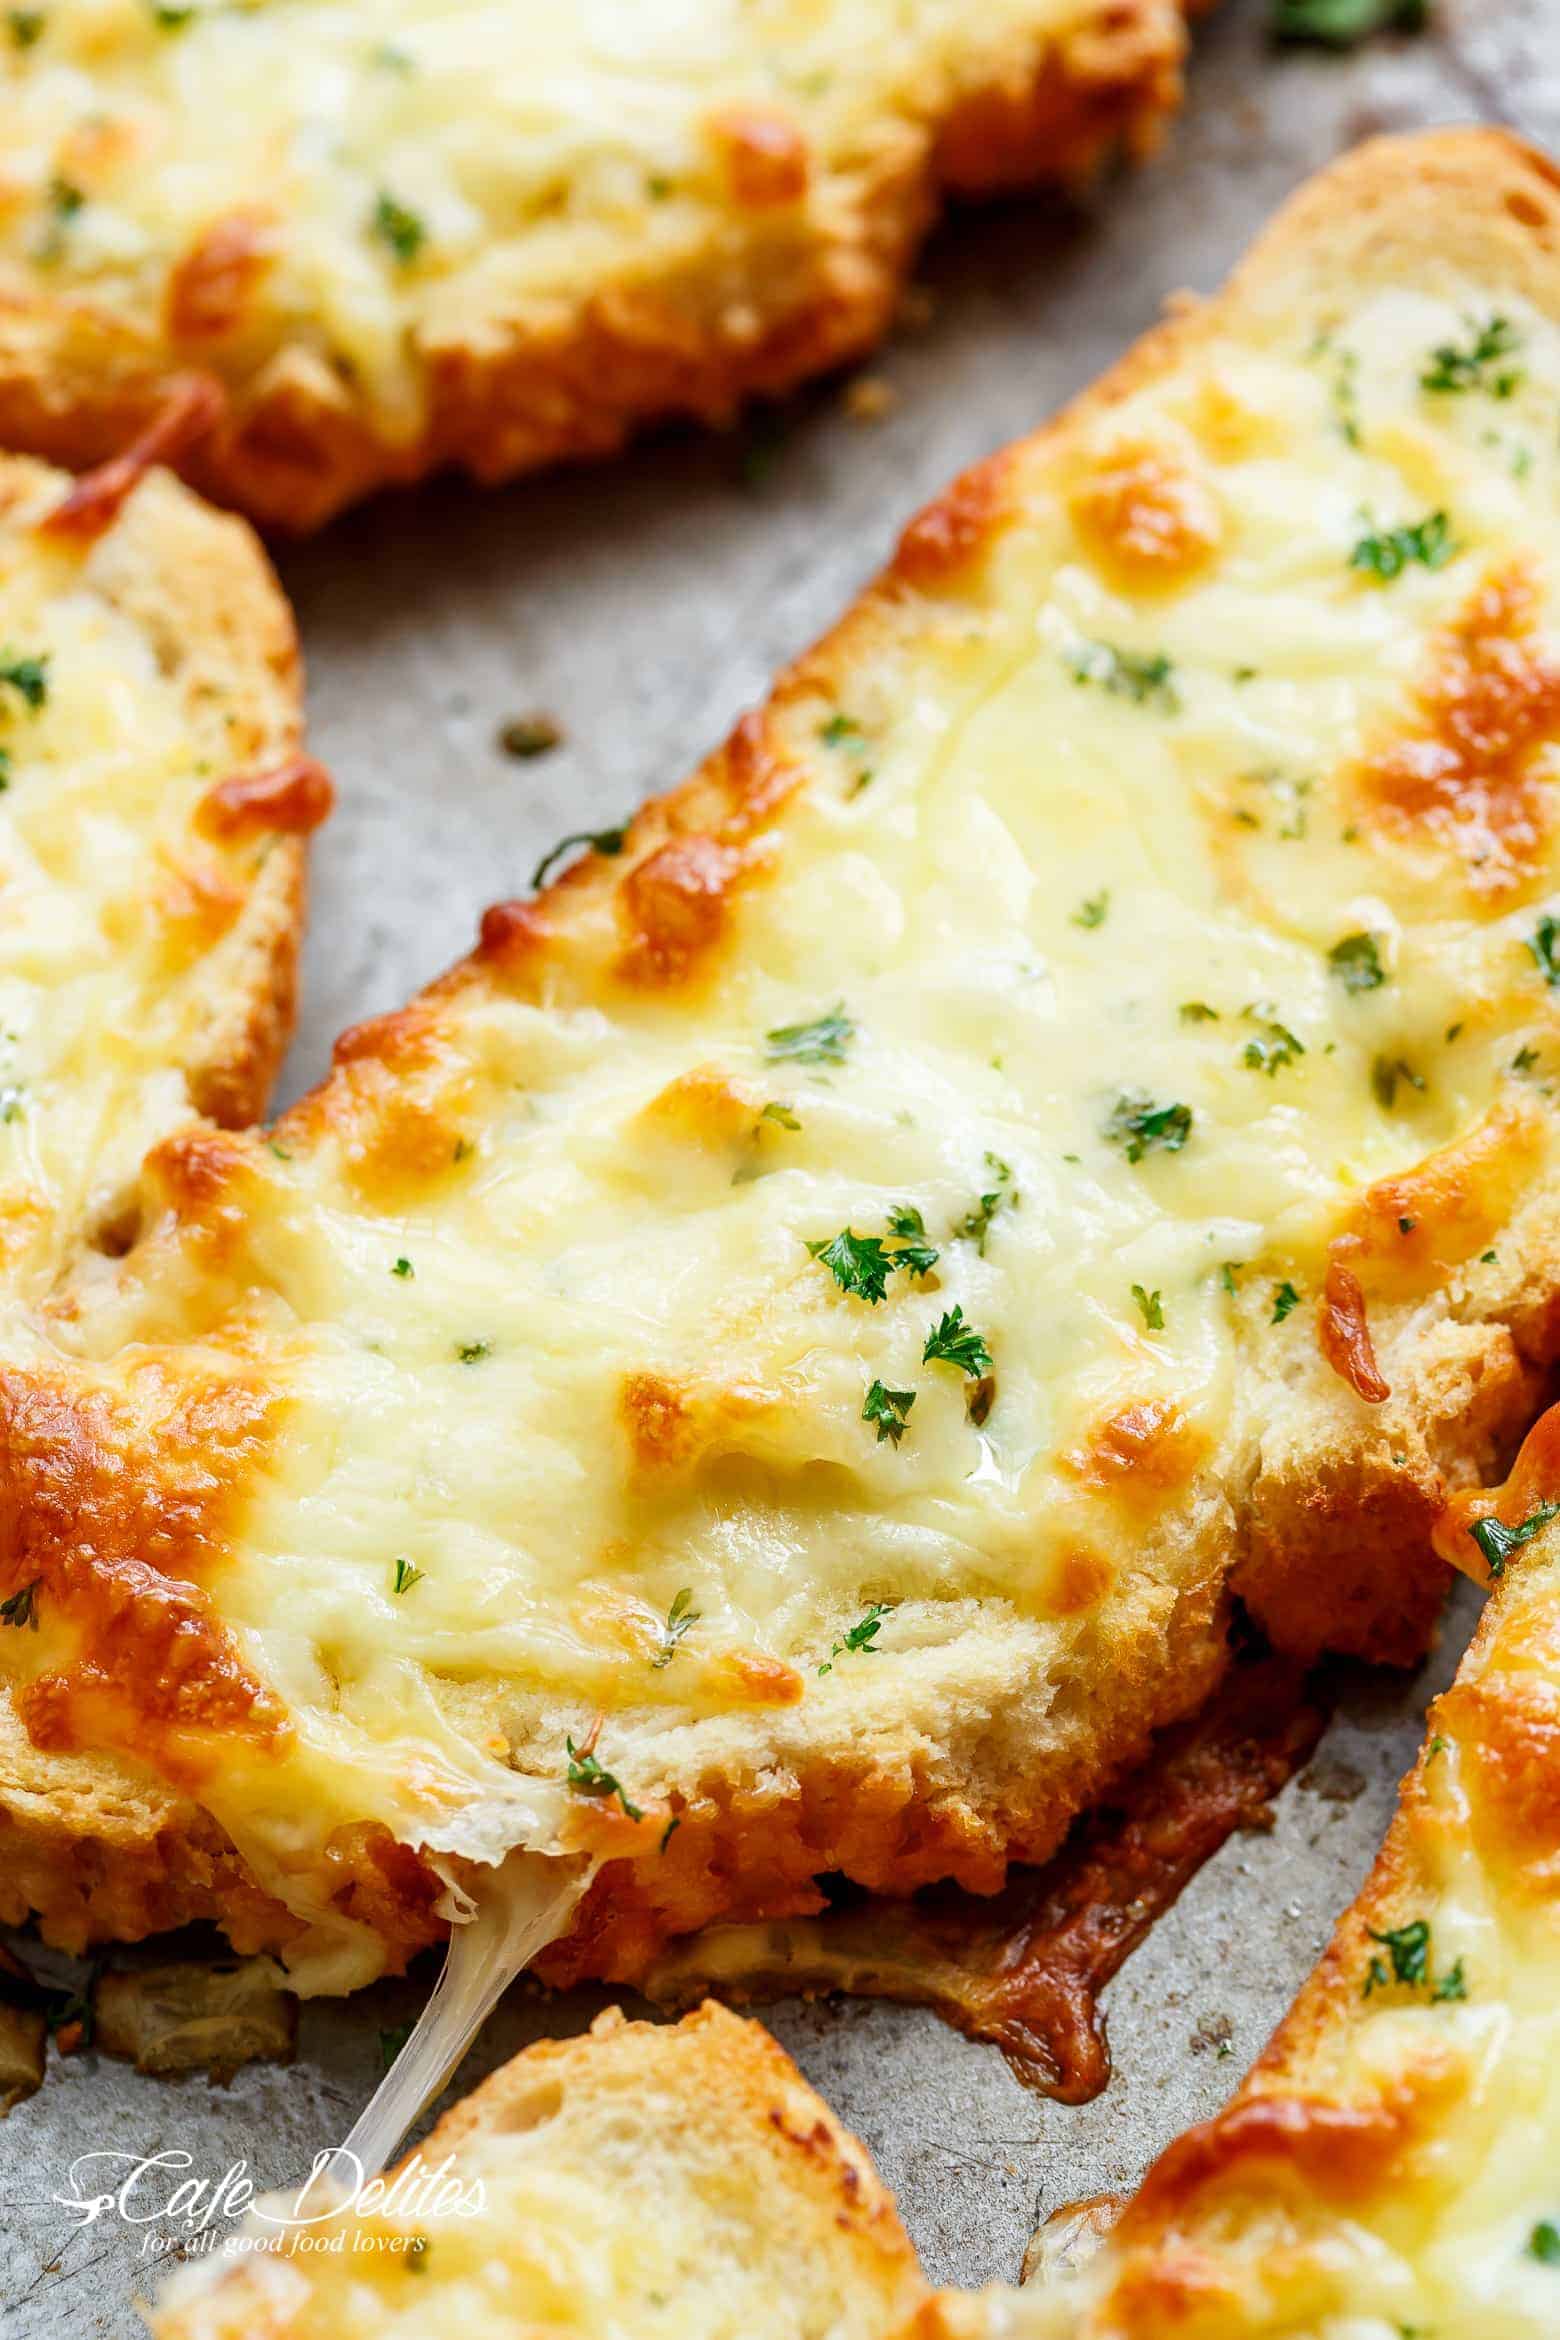 Top 20 Cheese Garlic Bread Recipe - Best Recipes Ideas and Collections